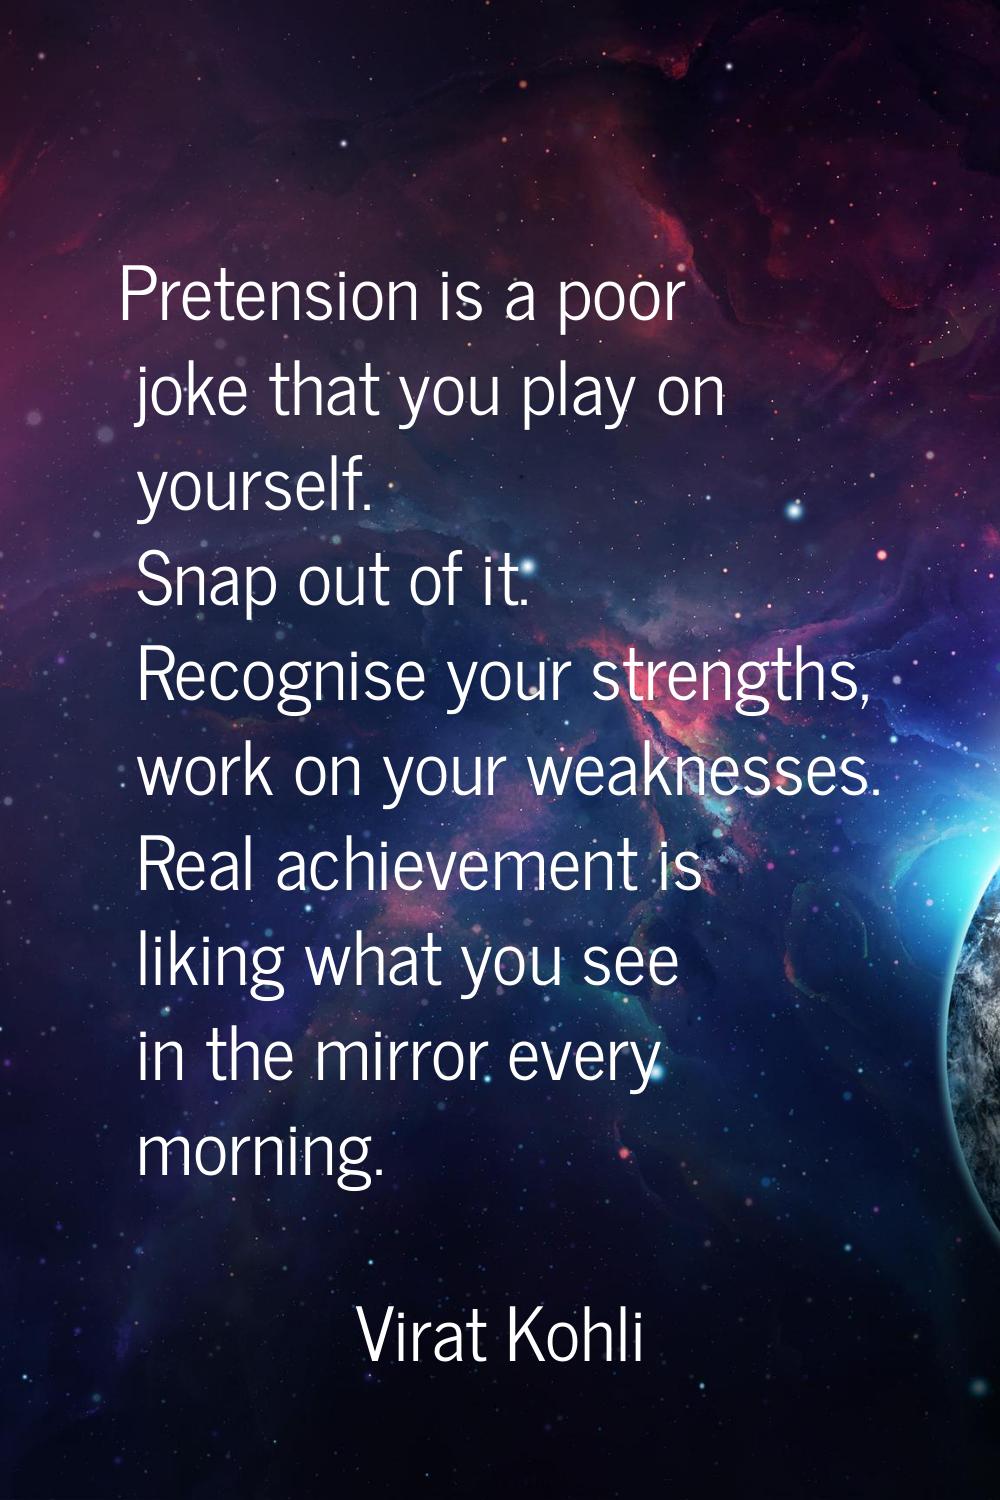 Pretension is a poor joke that you play on yourself. Snap out of it. Recognise your strengths, work